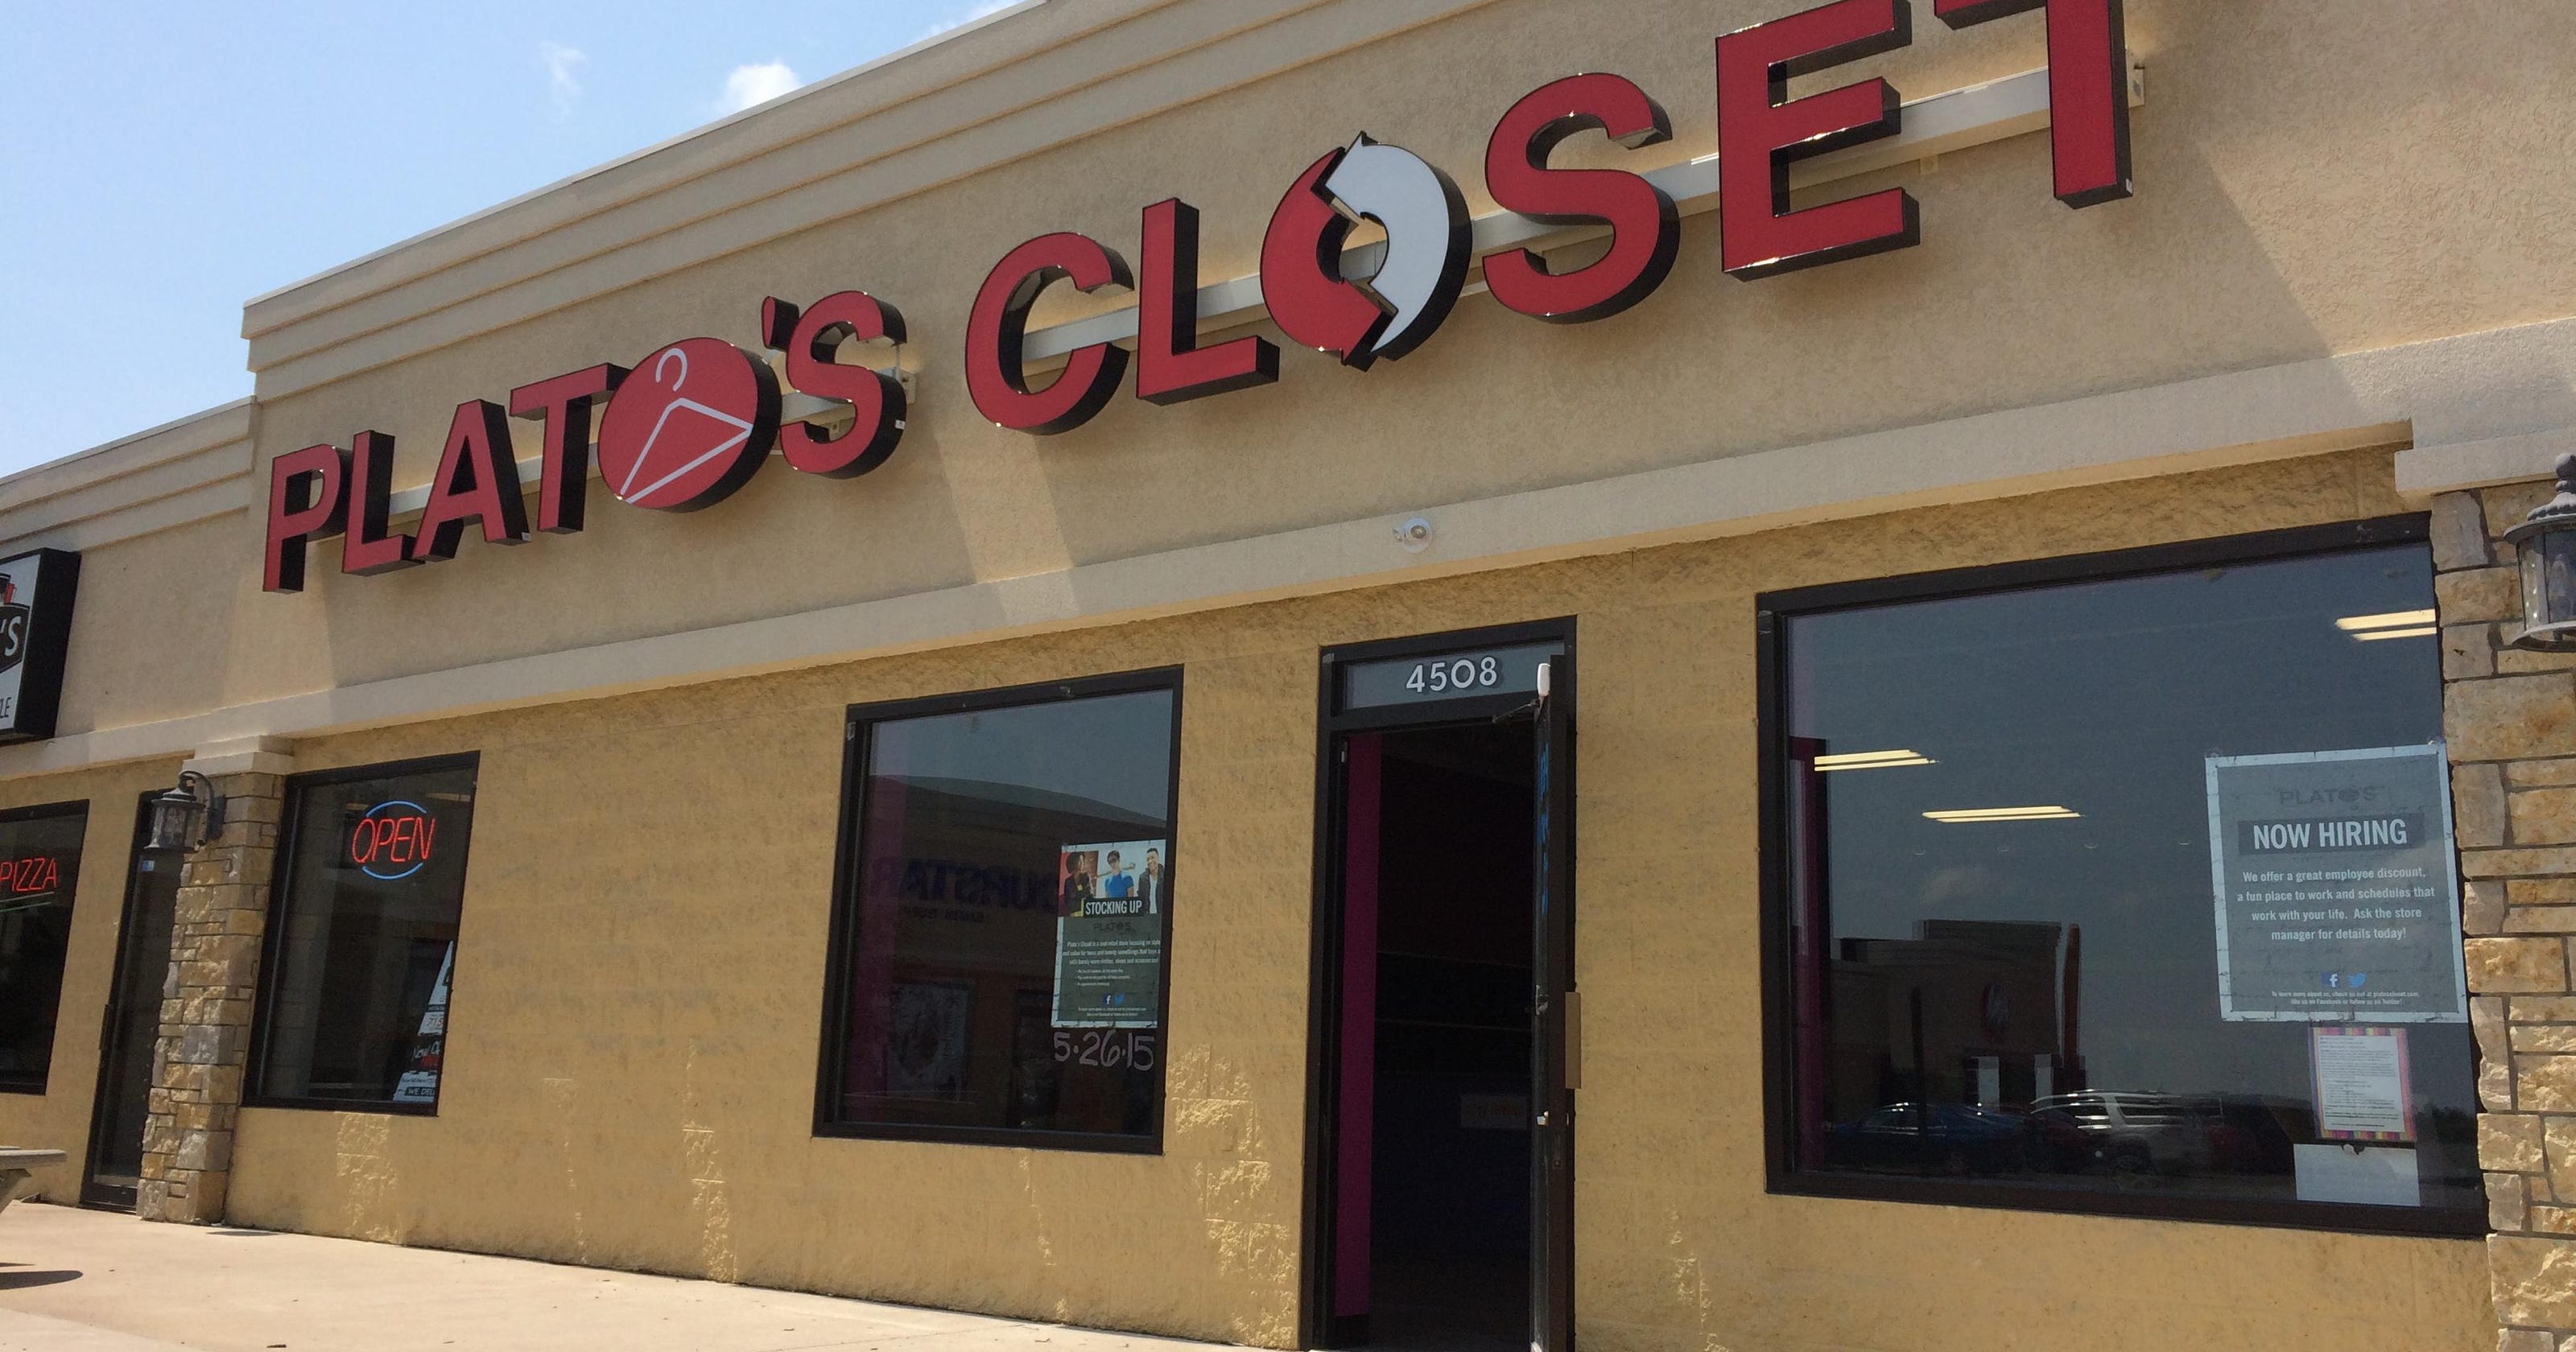 Plato’s Closet to open Thursday to sell clothes, accessories